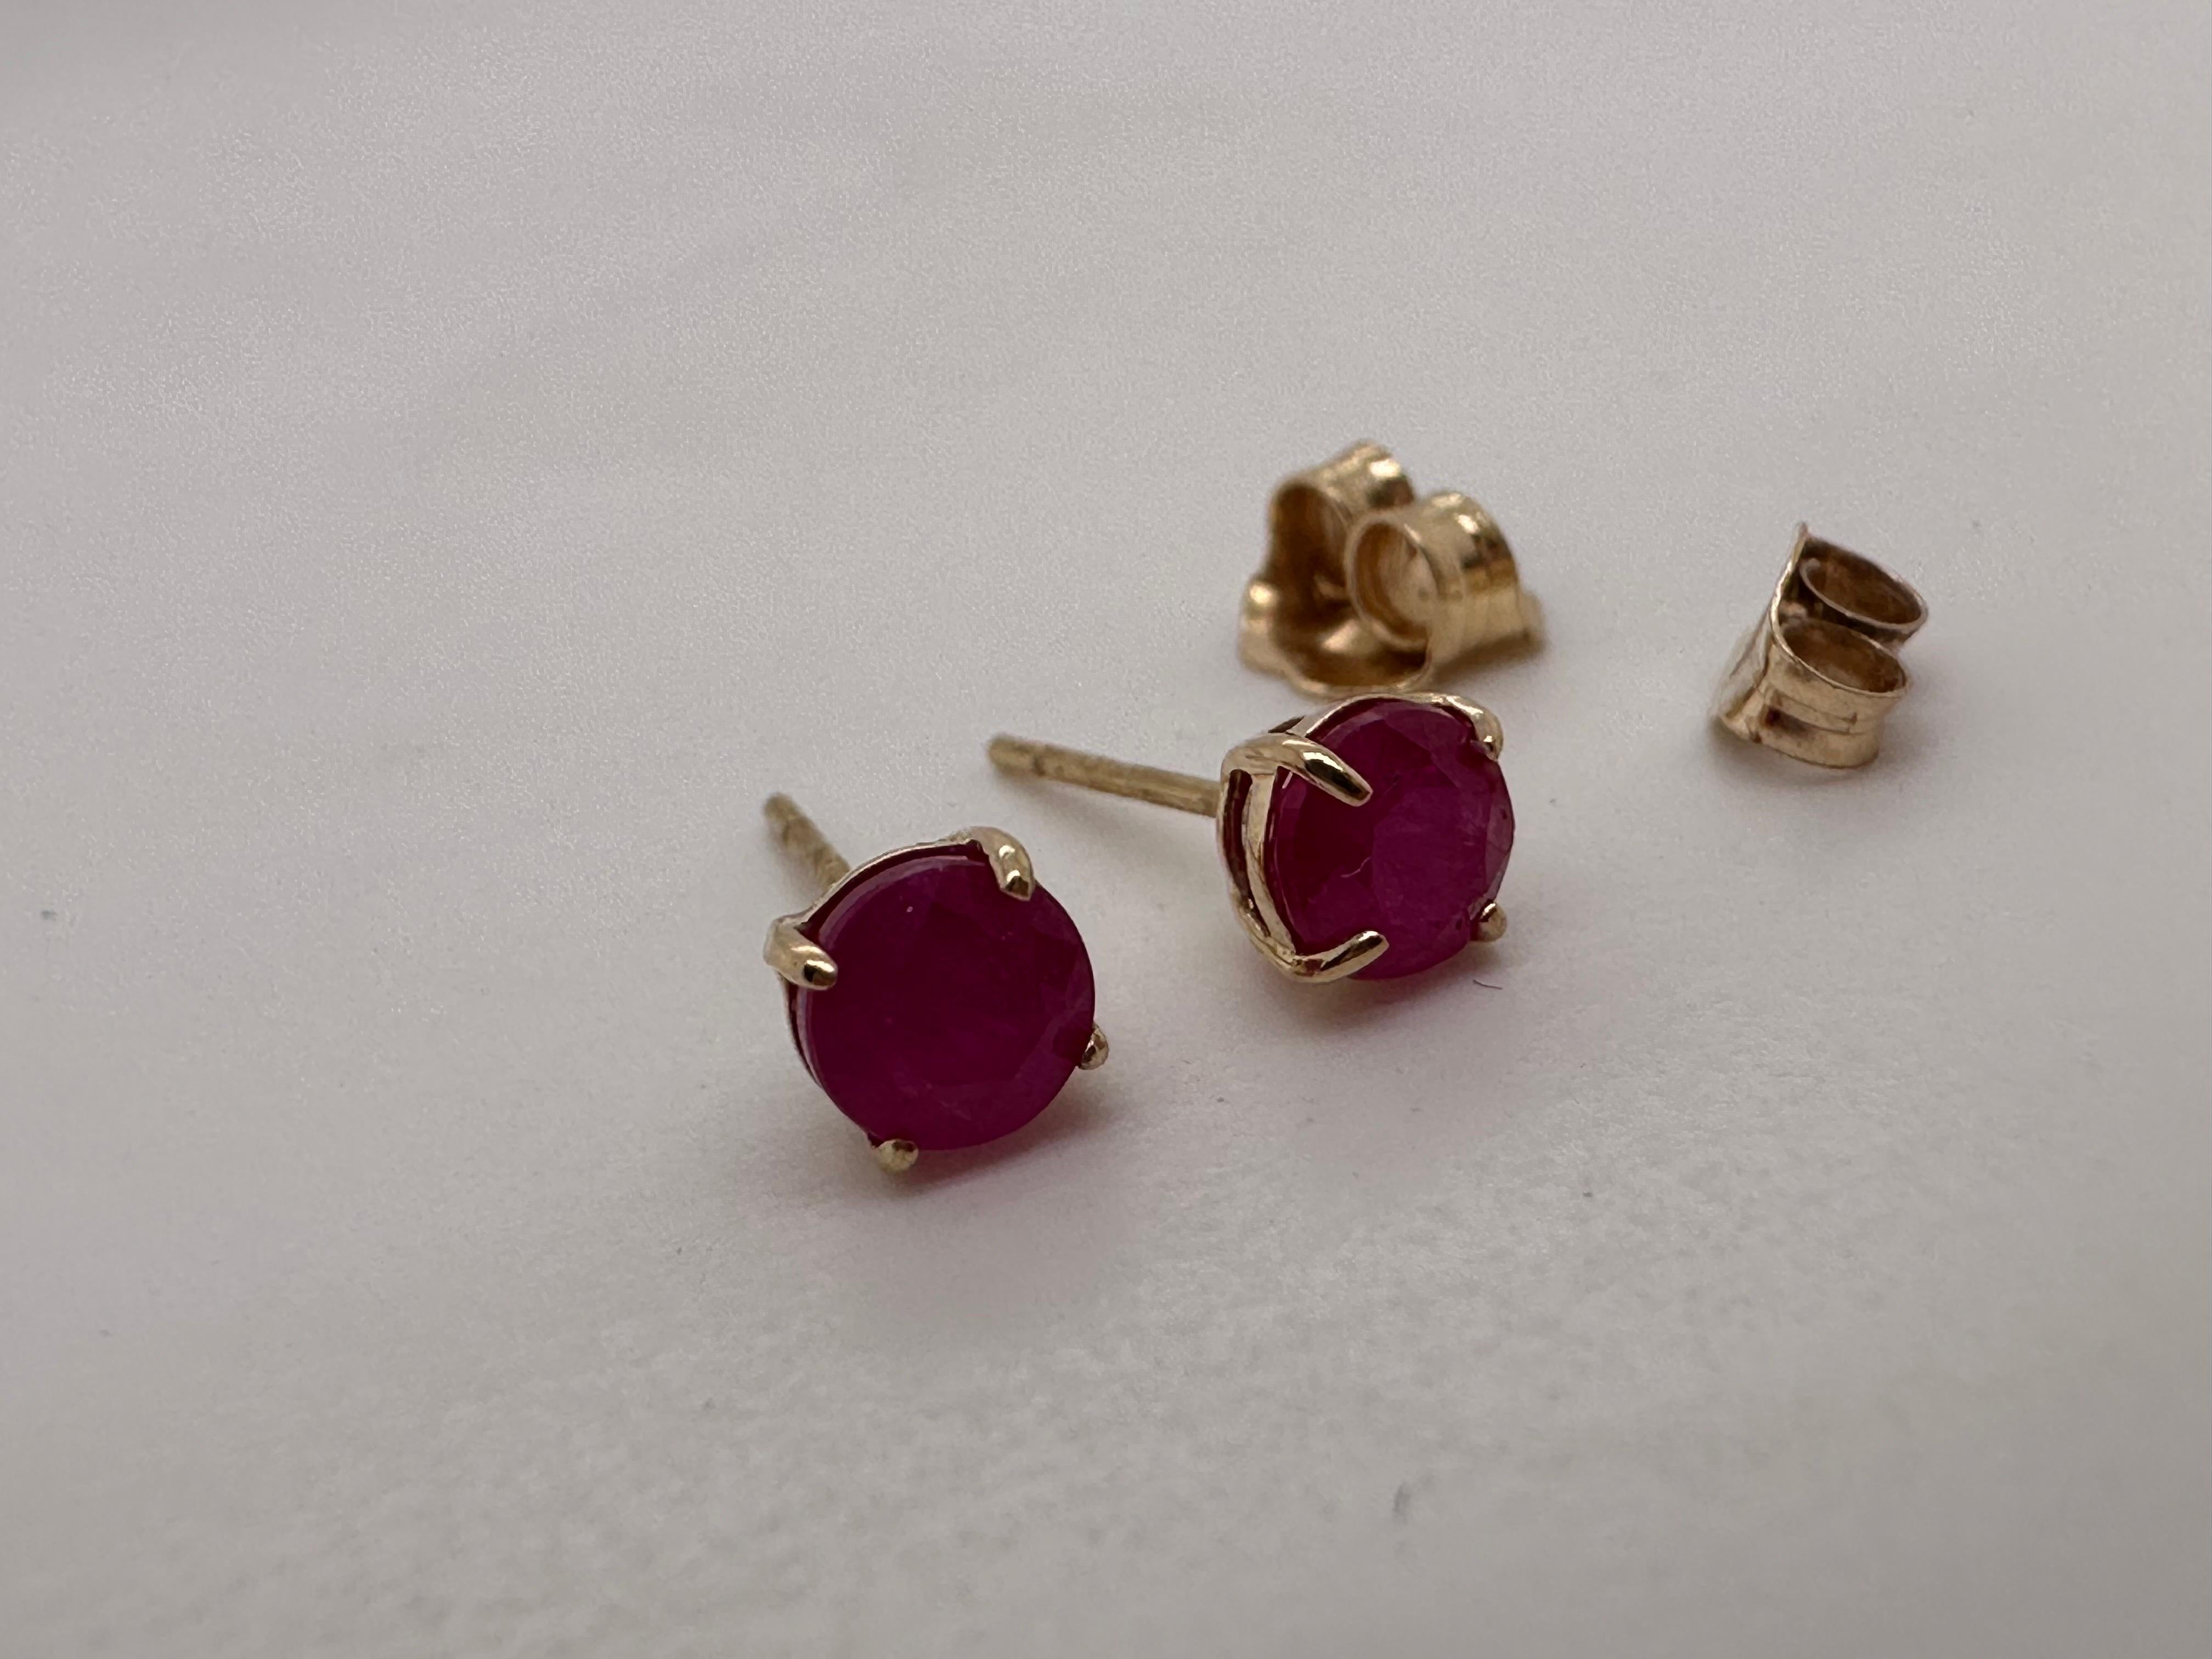 5mm ruby studs 14 karat yellow gold studs natural ruby earrings In New Condition For Sale In Boca Raton, FL